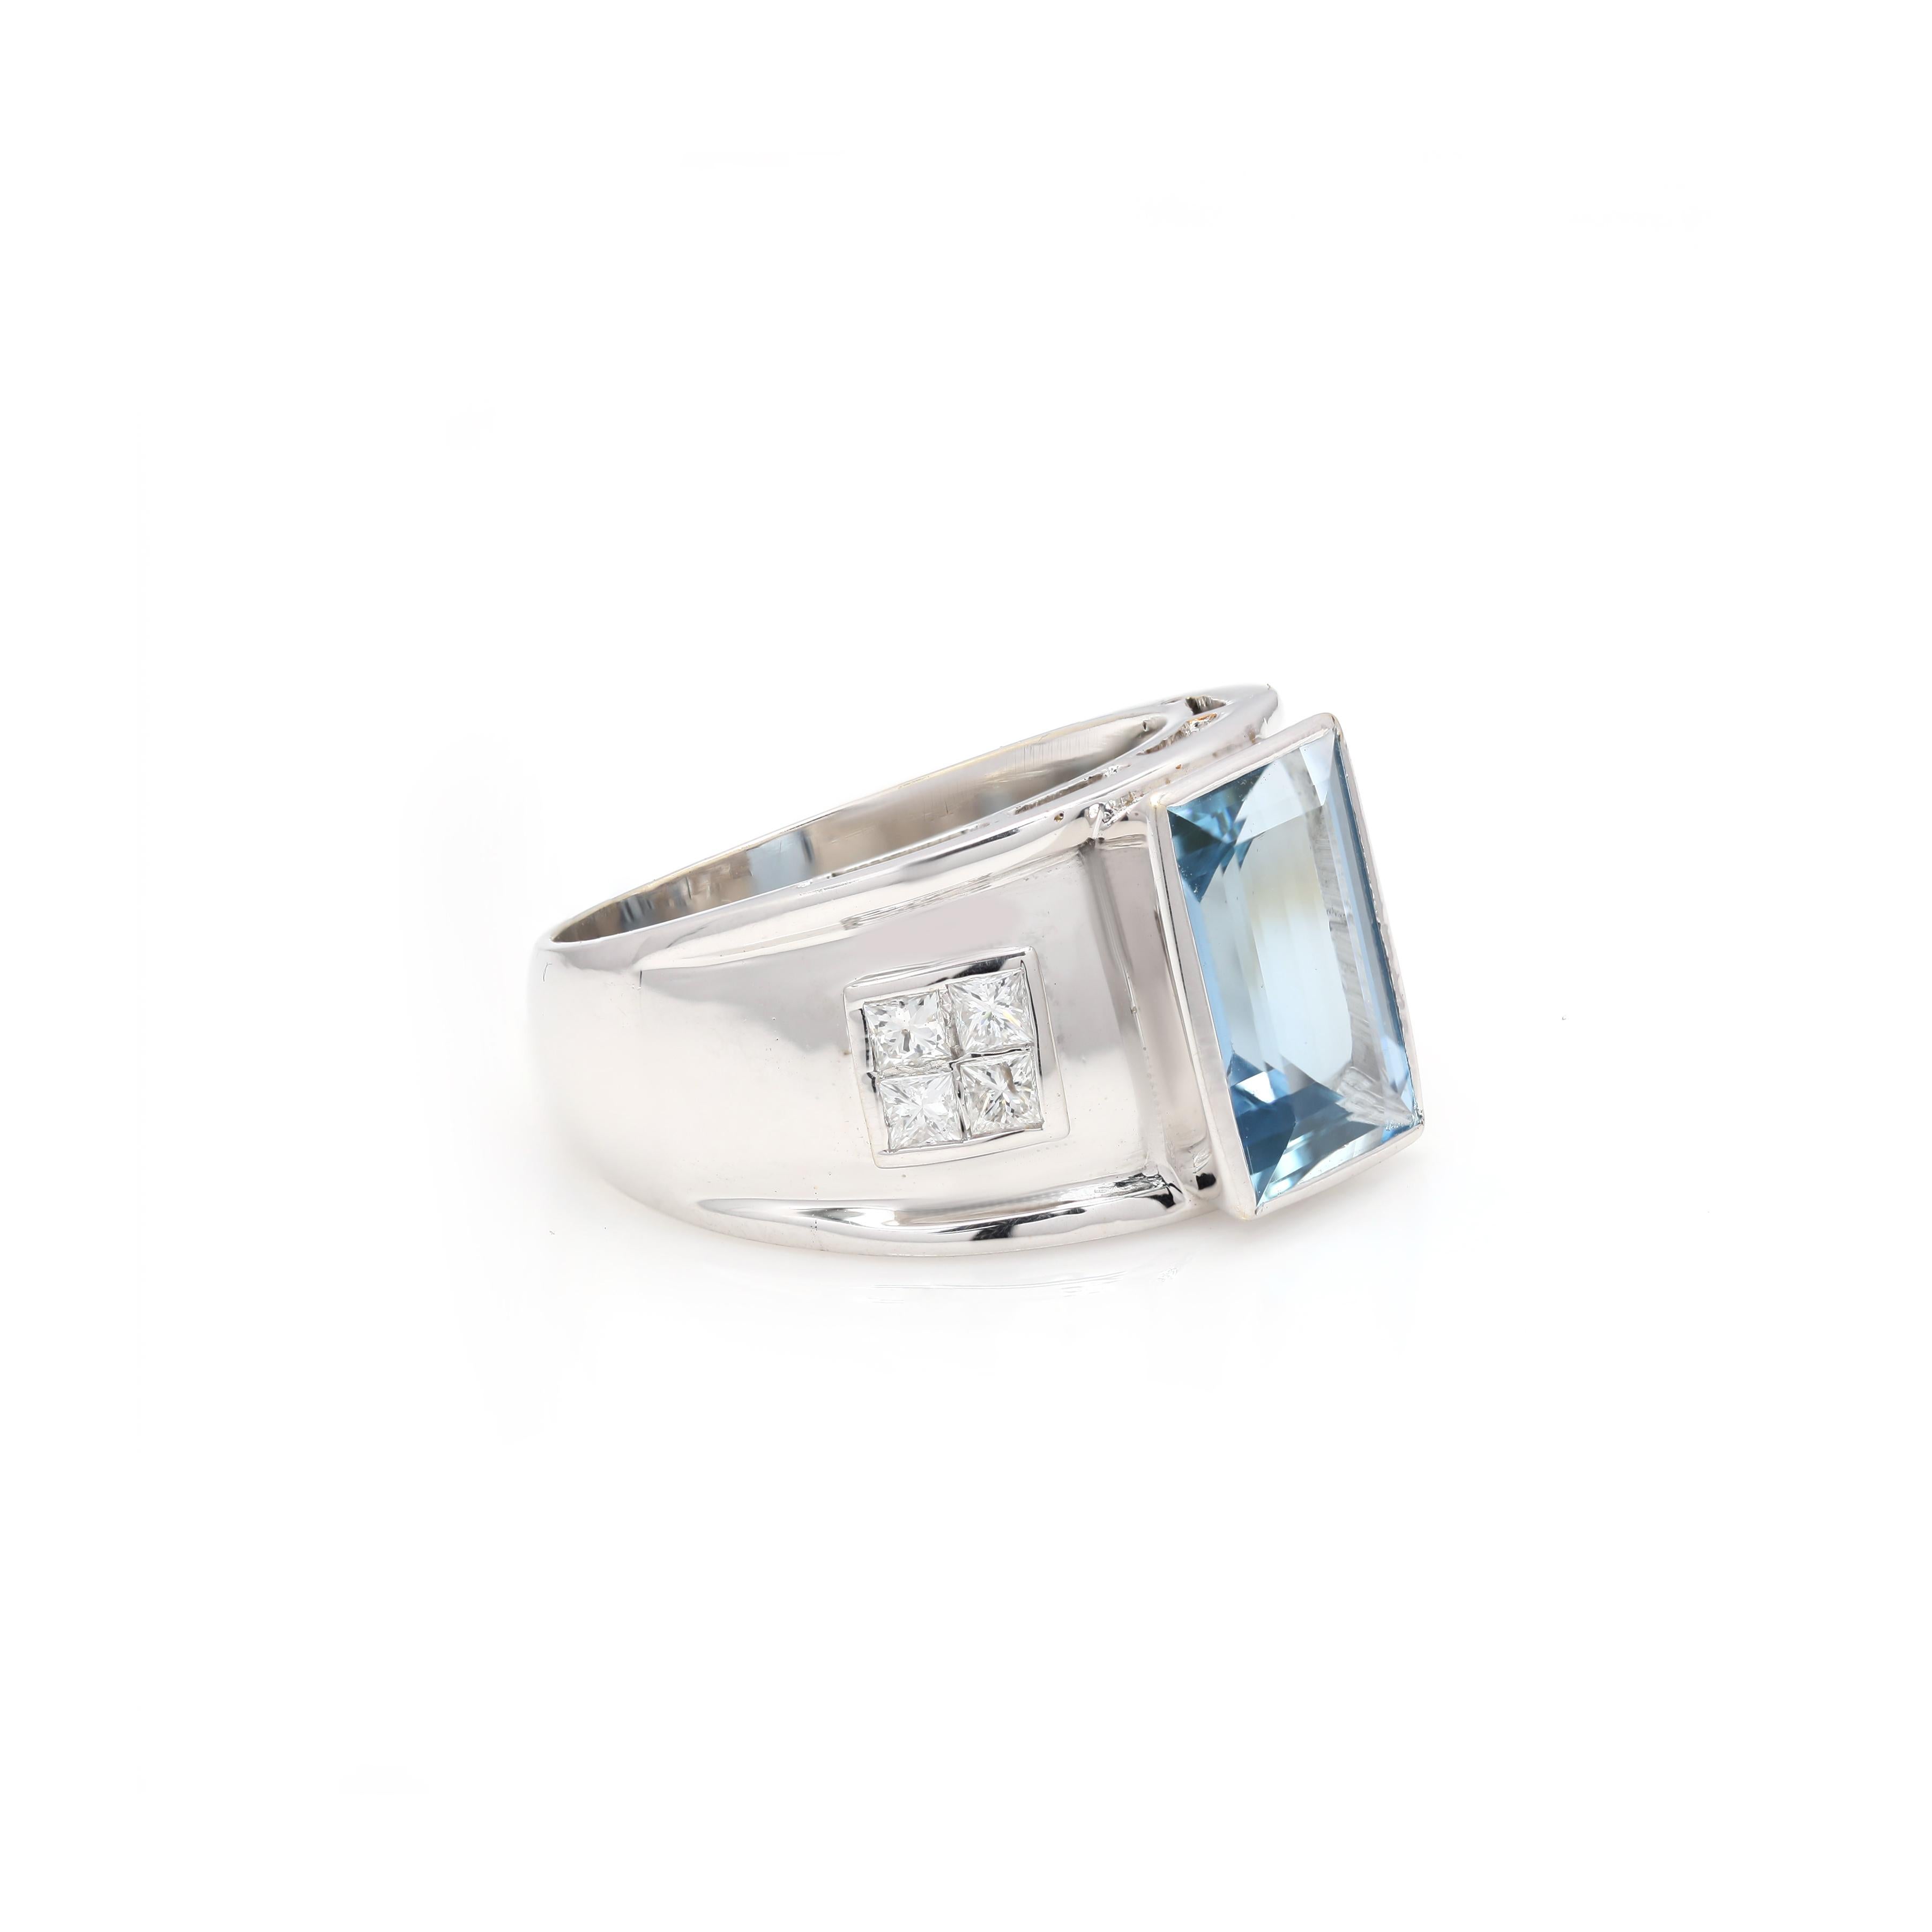 For Sale:  Statement 5.6 Carat Aquamarine Men's Ring with Diamonds in 18K White Gold 2